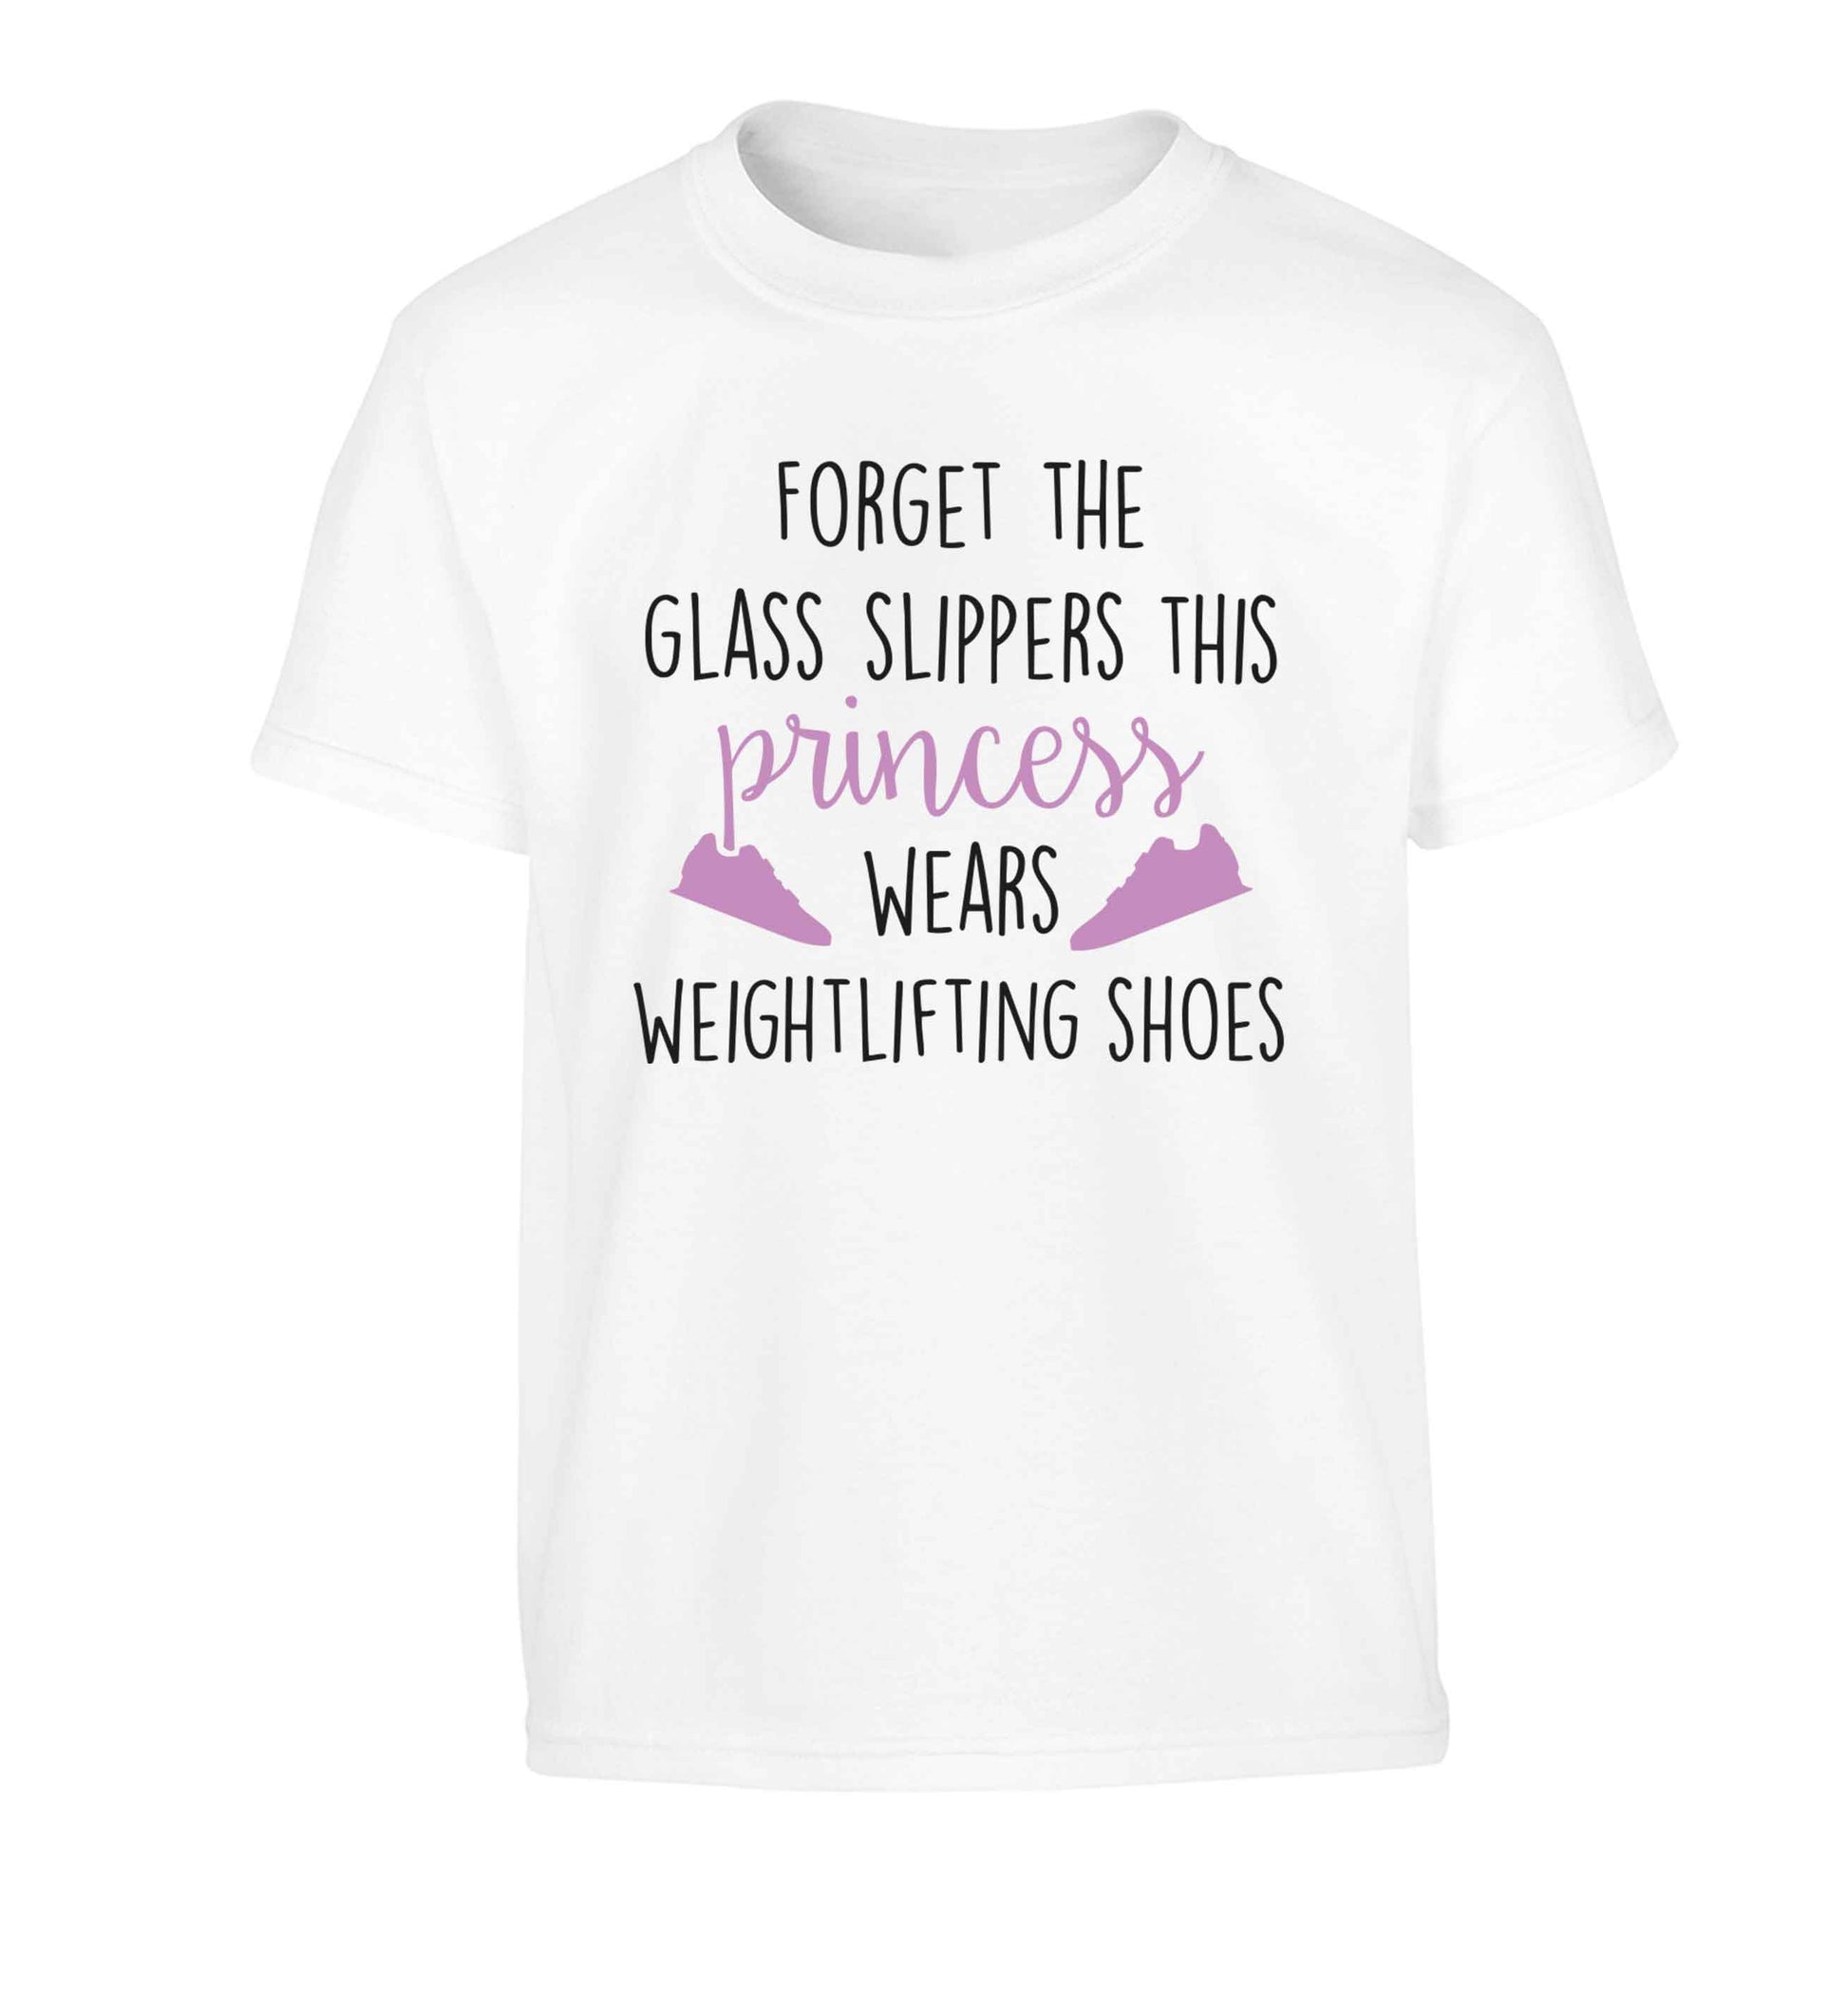 Forget the glass slippers this princess wears weightlifting shoes Children's white Tshirt 12-13 Years